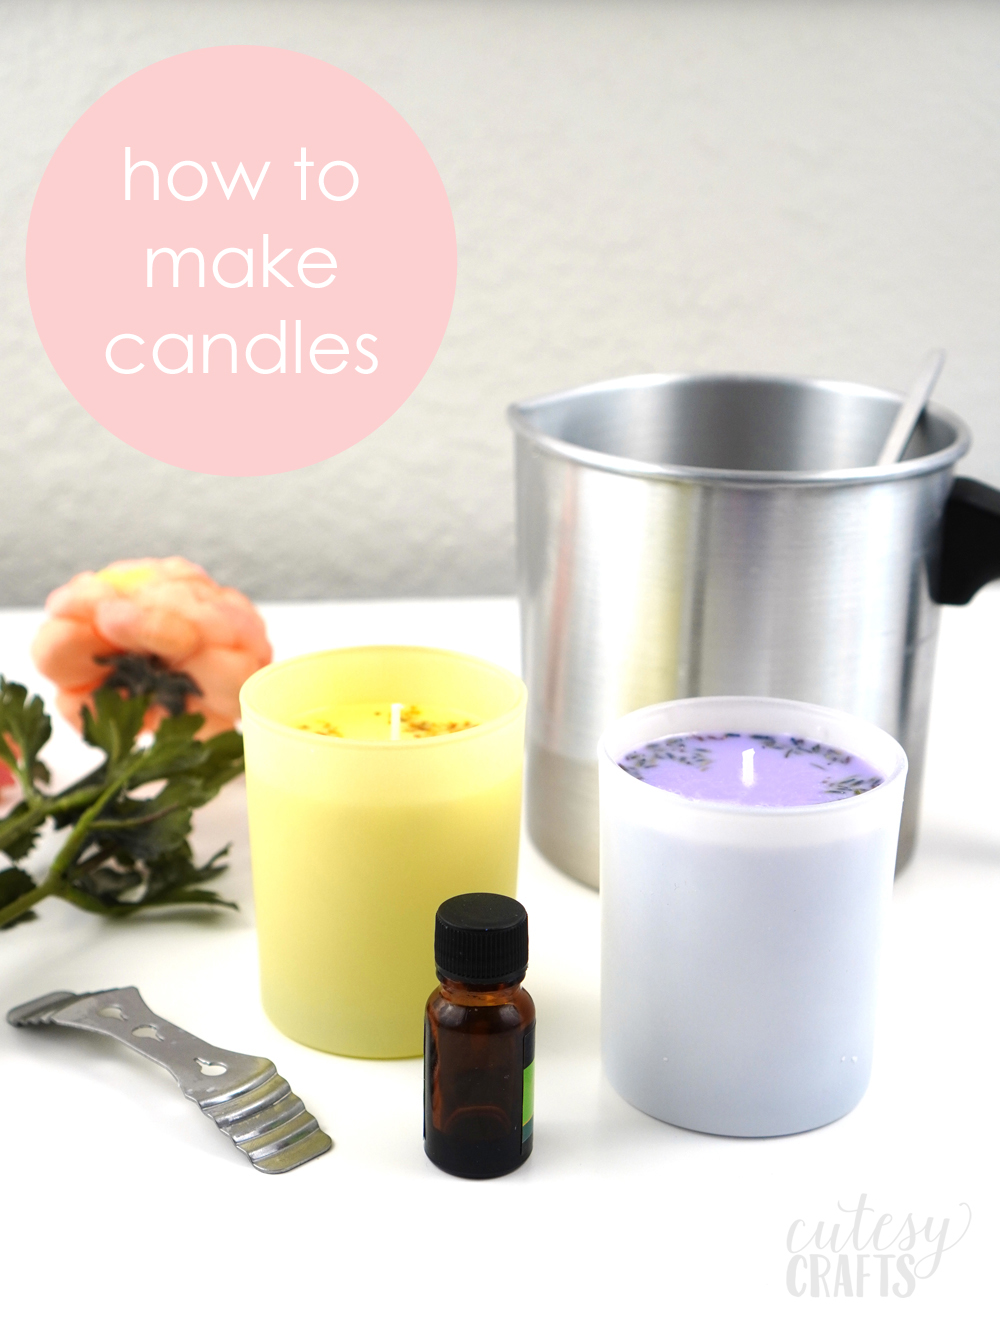 How To Make Your Own Candles: 9 EASY Steps! | LaptrinhX / News